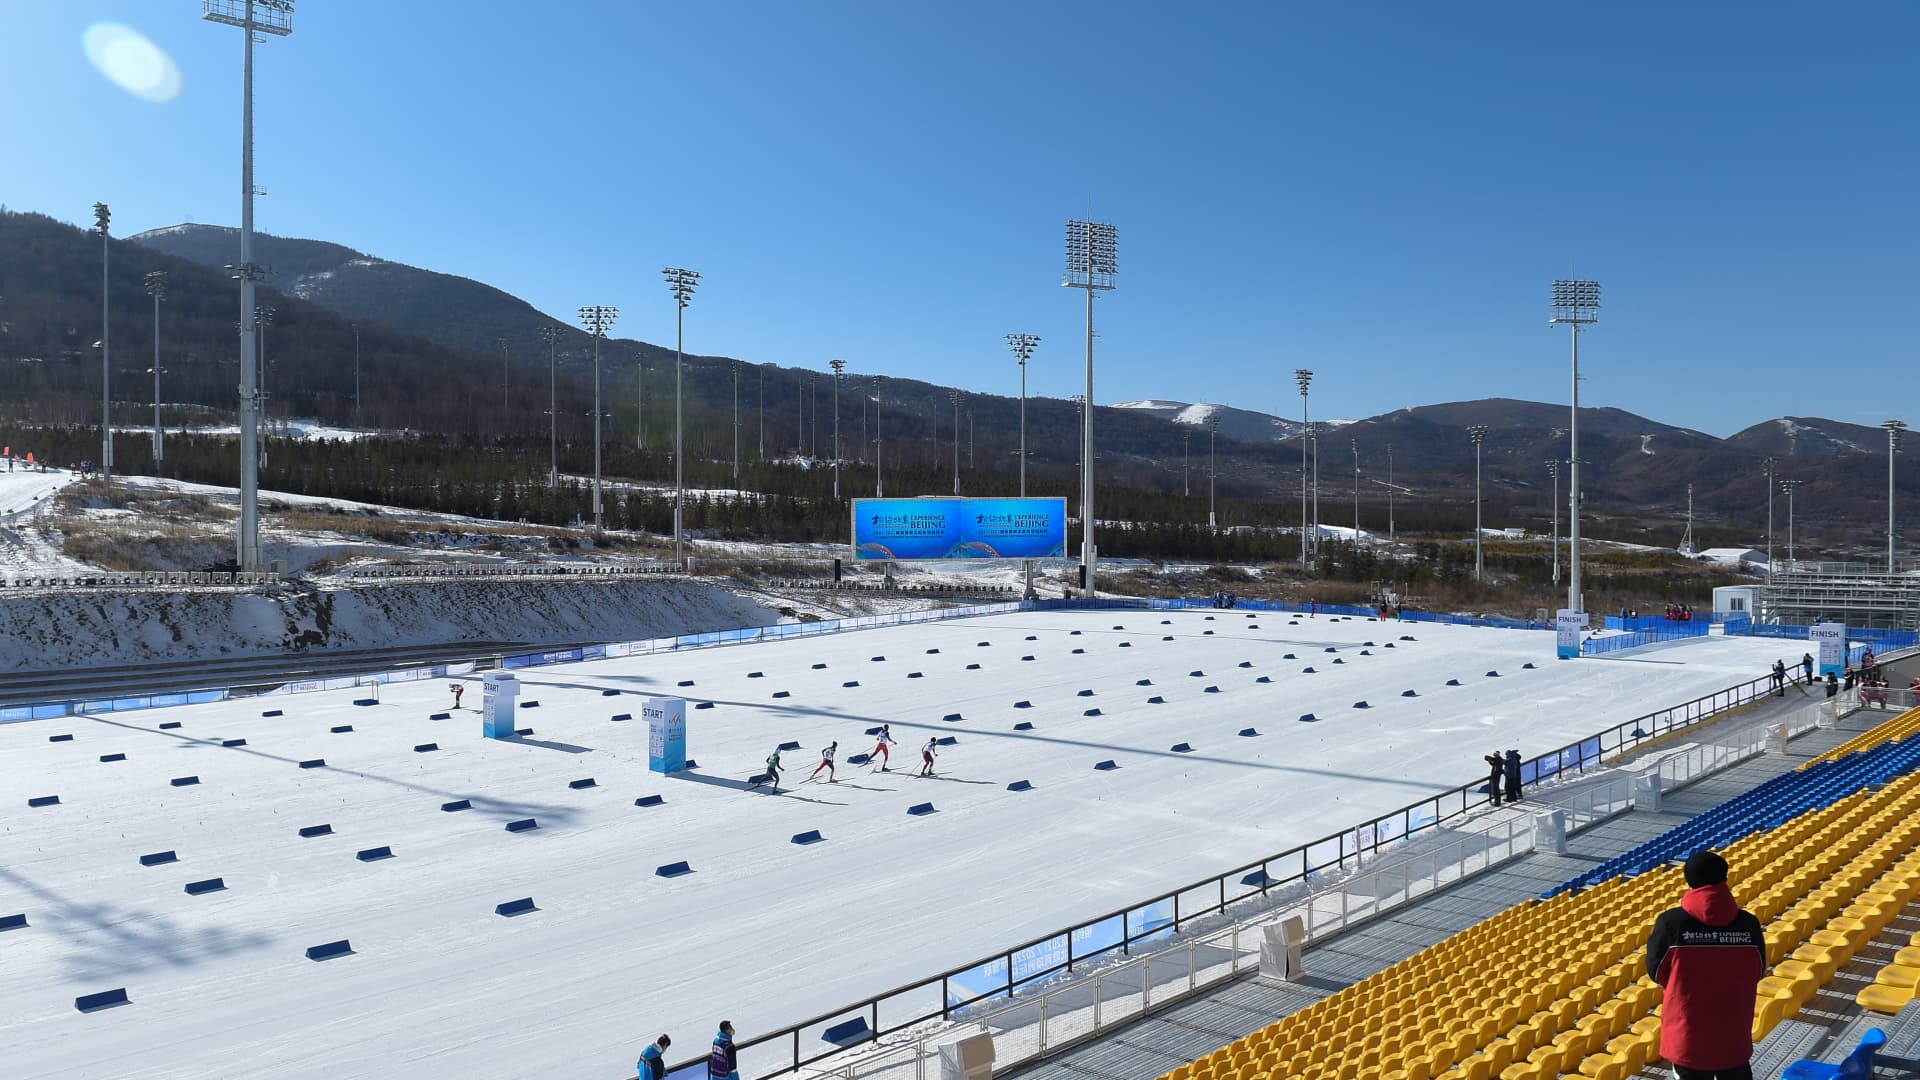 A general view of the National Cross-Country centre during the FIS Continental Cup Nordic Combined 2021/2022, part of a 2022 Beijing Winter Olympic Games test event in Zhangjiakou city, China on December 5, 2021